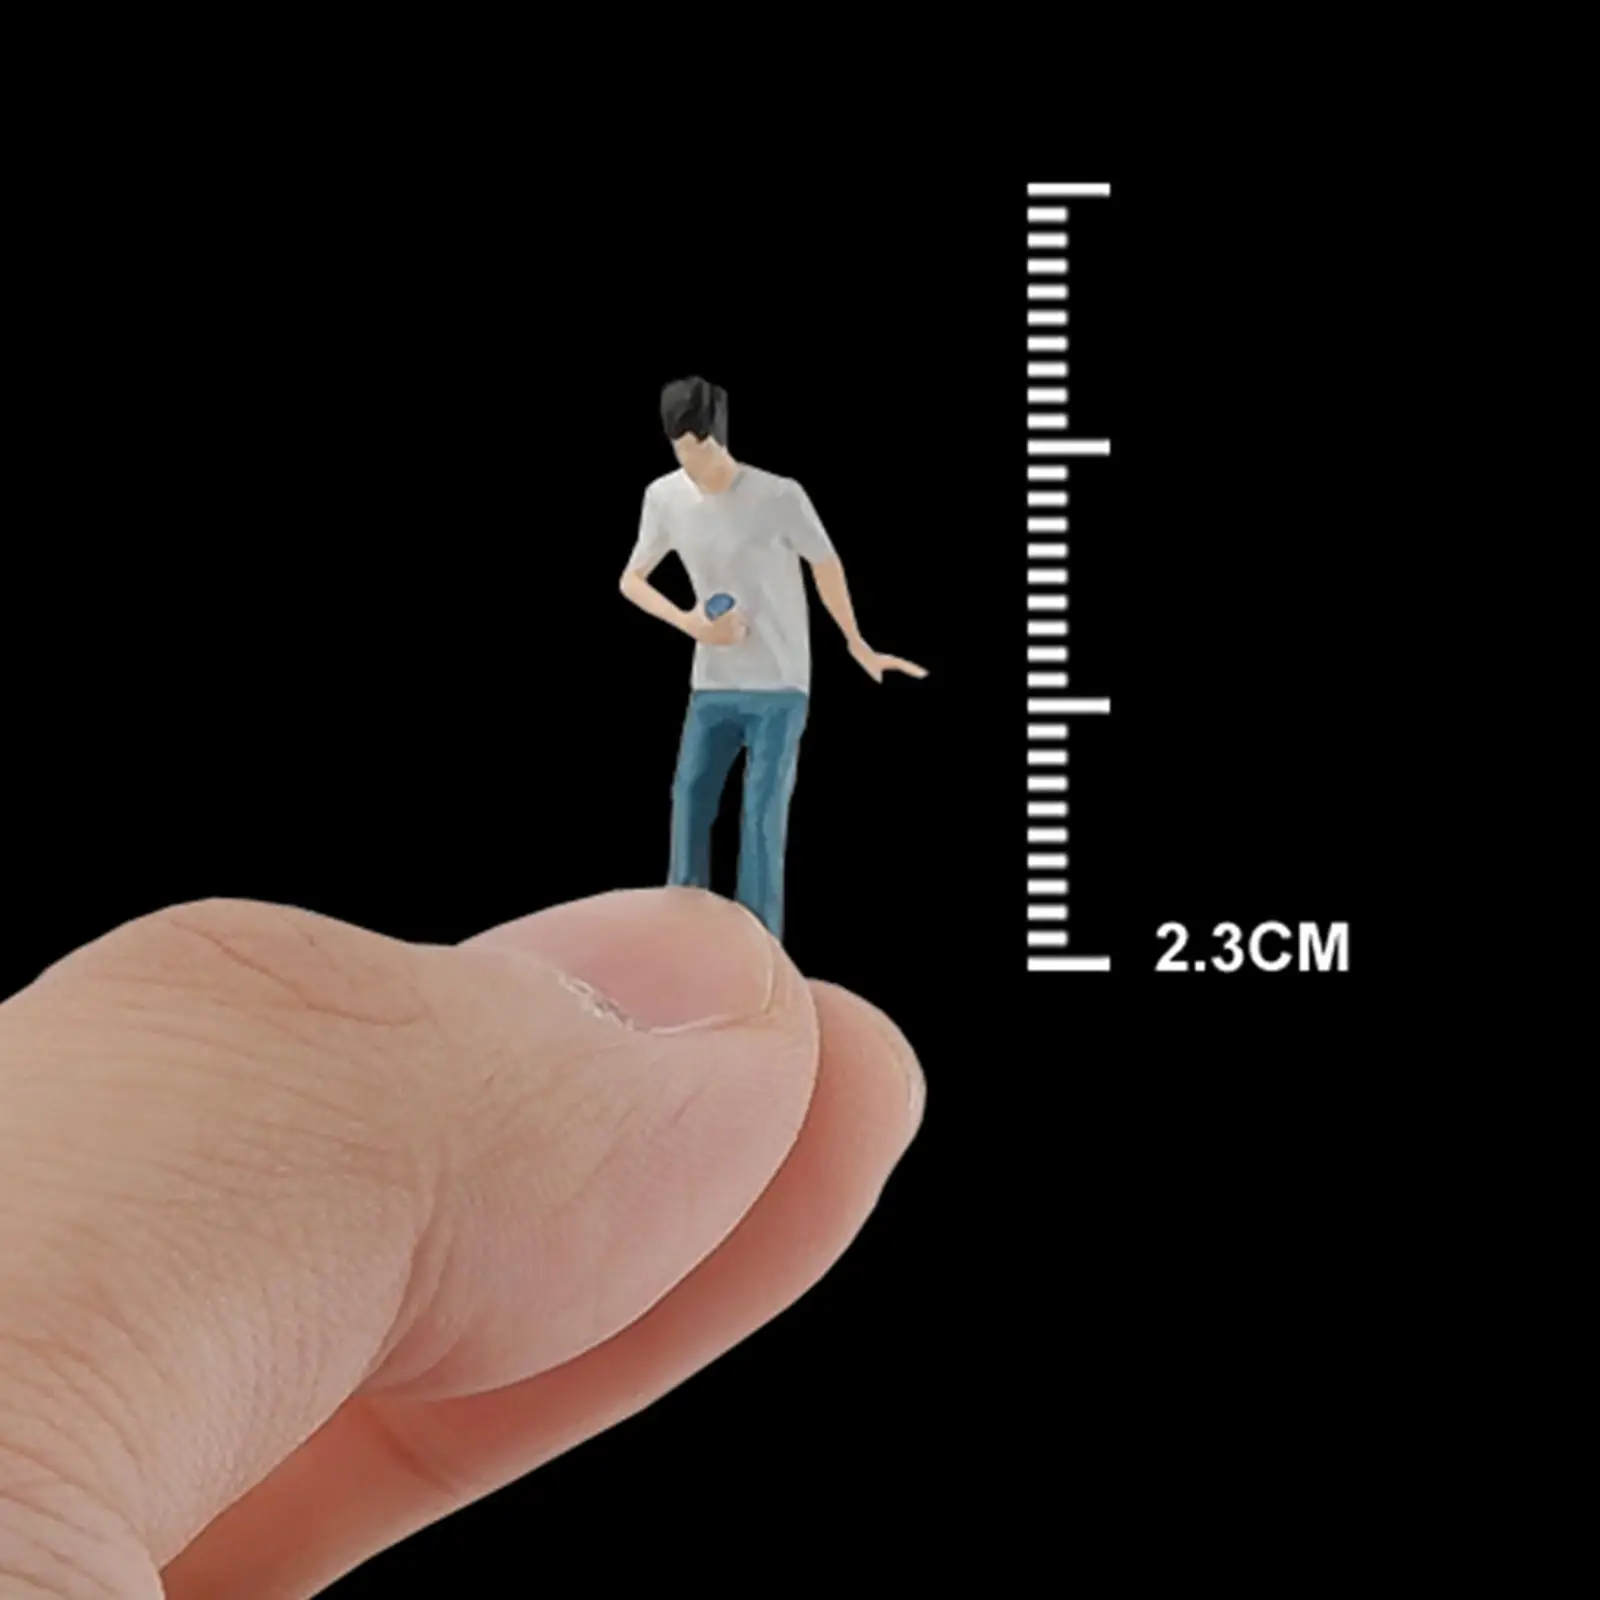 1:64 People Figures Tiny People Model DIY Crafts White T Shirt Man for Miniature Scene Dollhouse Diorama Ornament Accessories